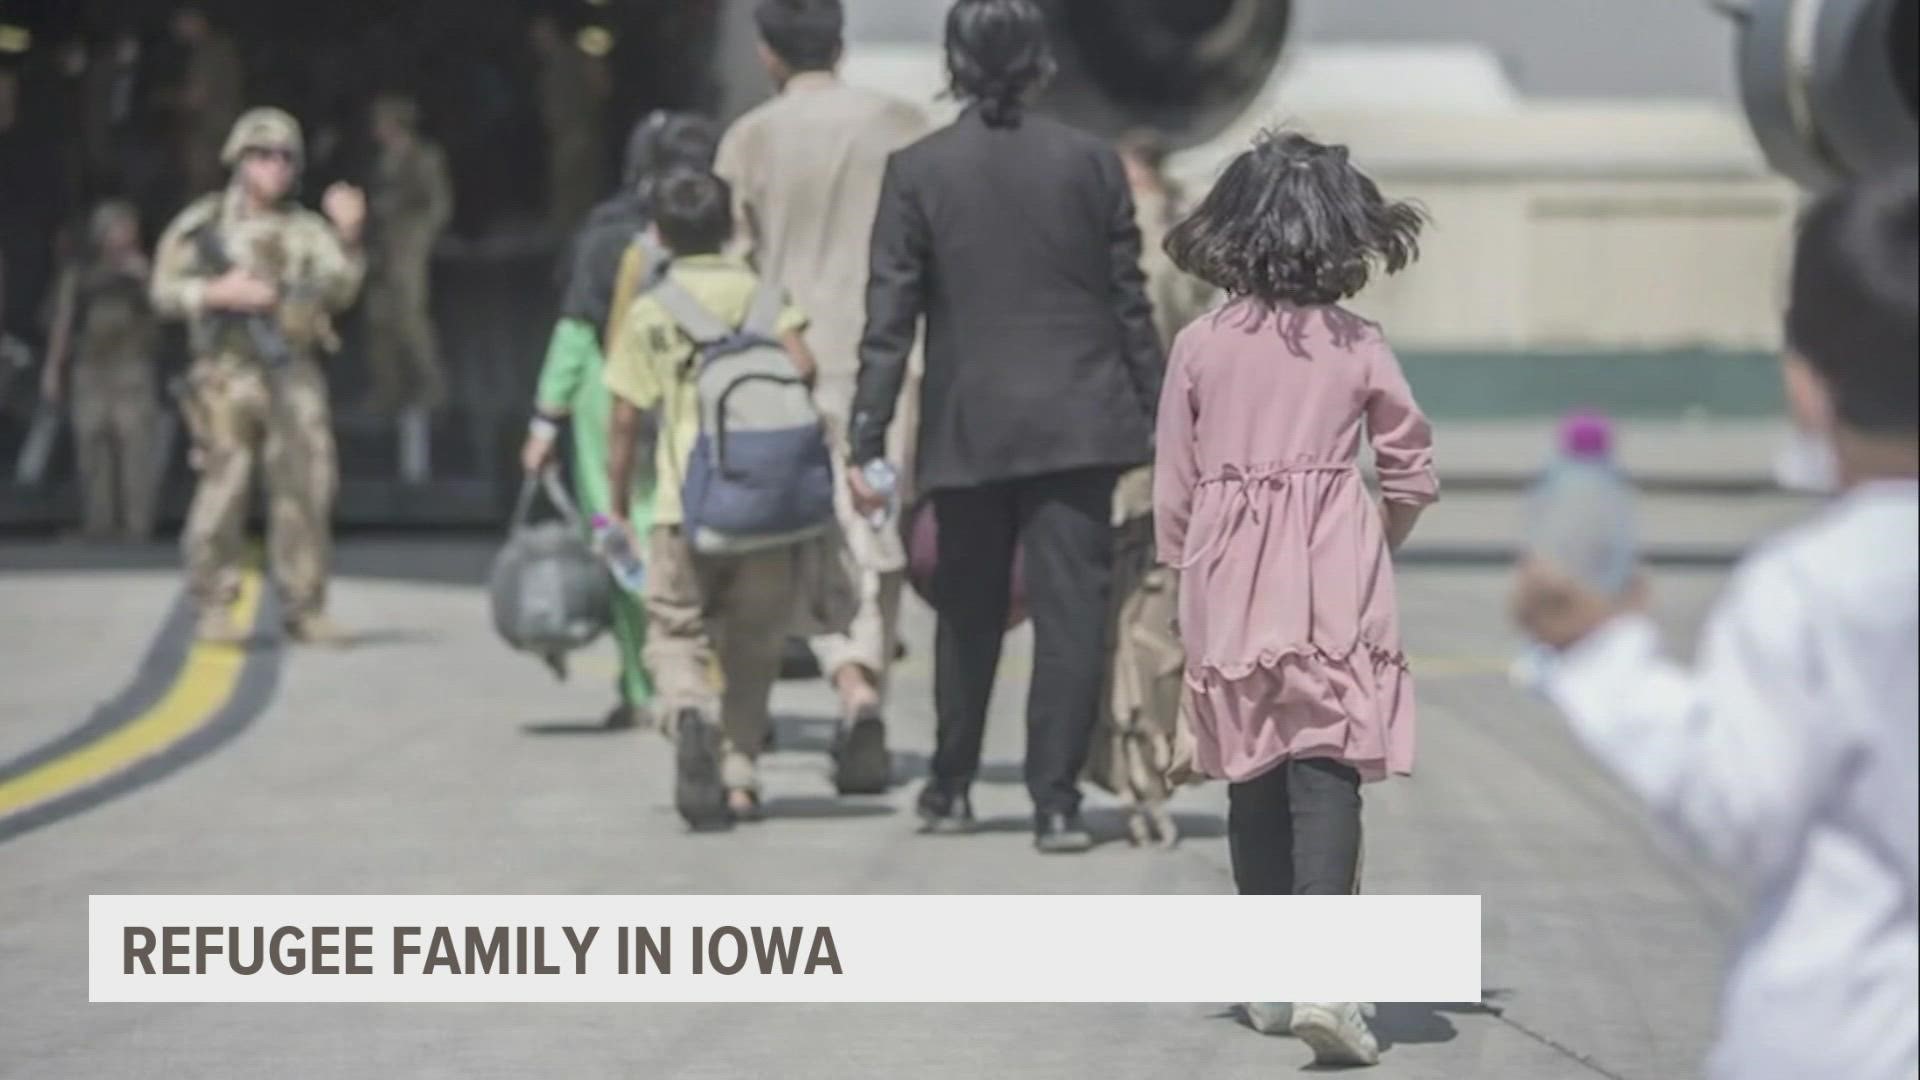 A family who escaped Afghanistan has been in Des Moines for over a week. The U.S. Committee for Refugees and Immigrants said they are helping to settle the family.